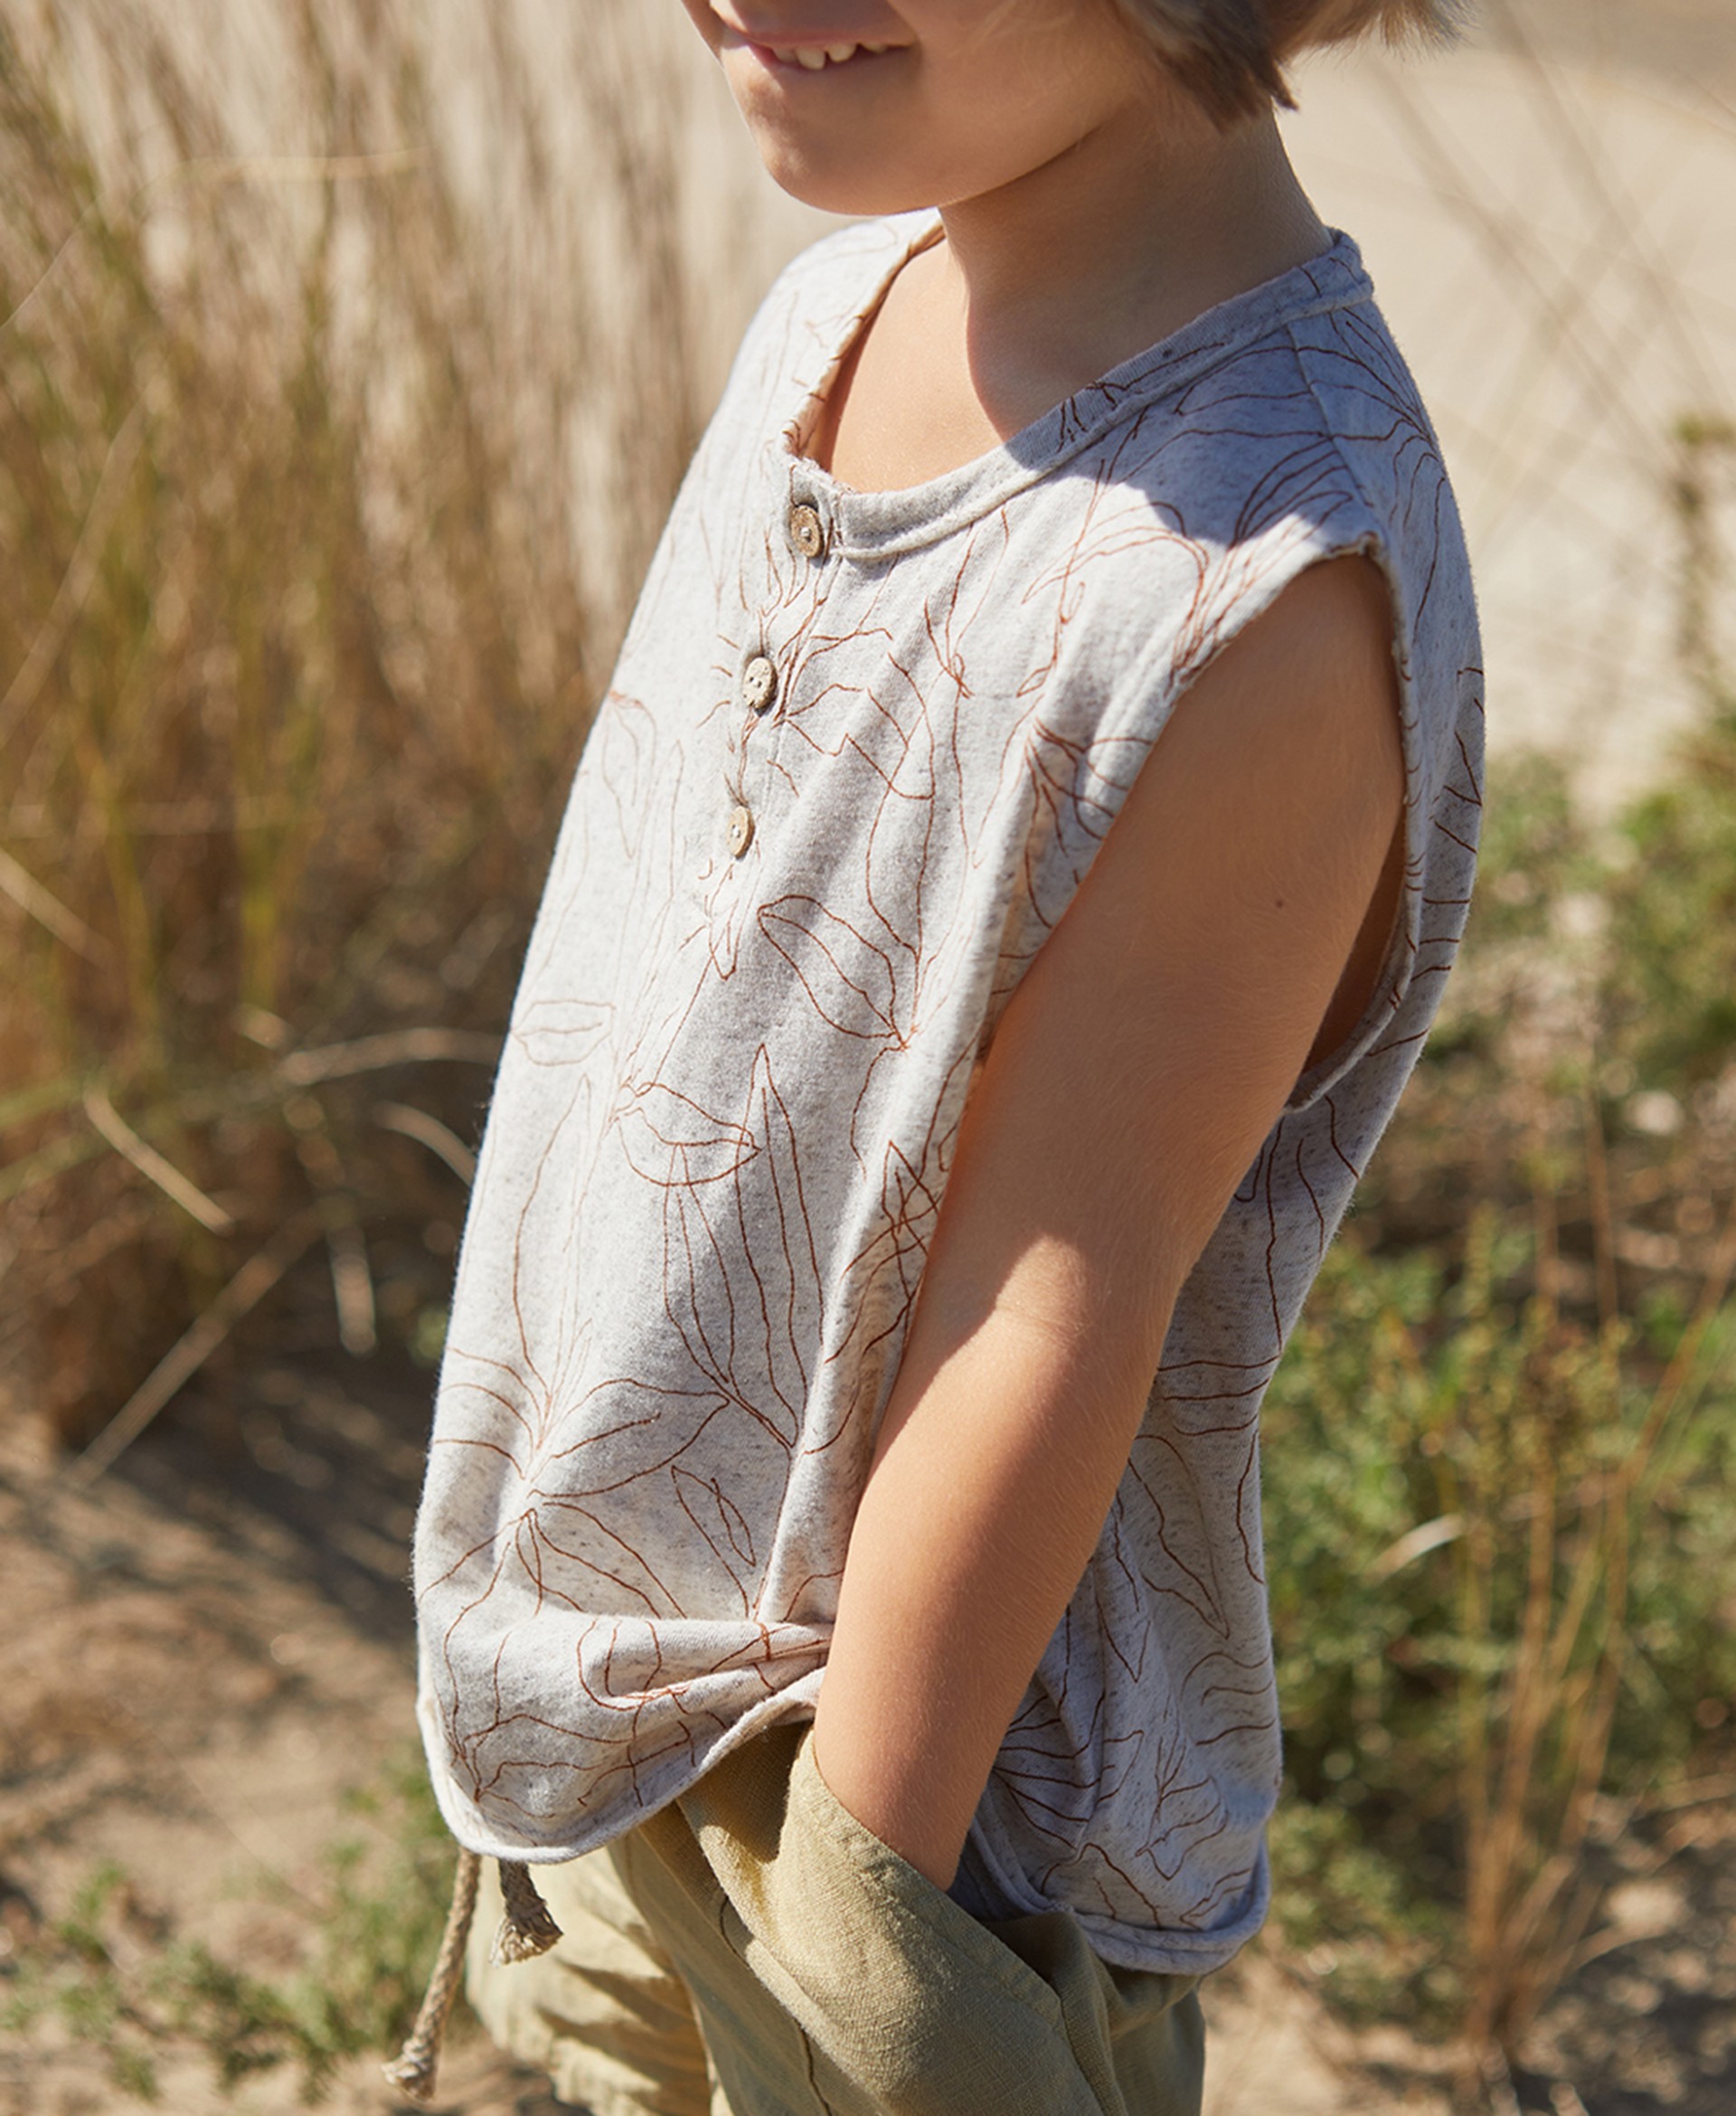 Sleeveless T-shirt with front opening | Organic Care